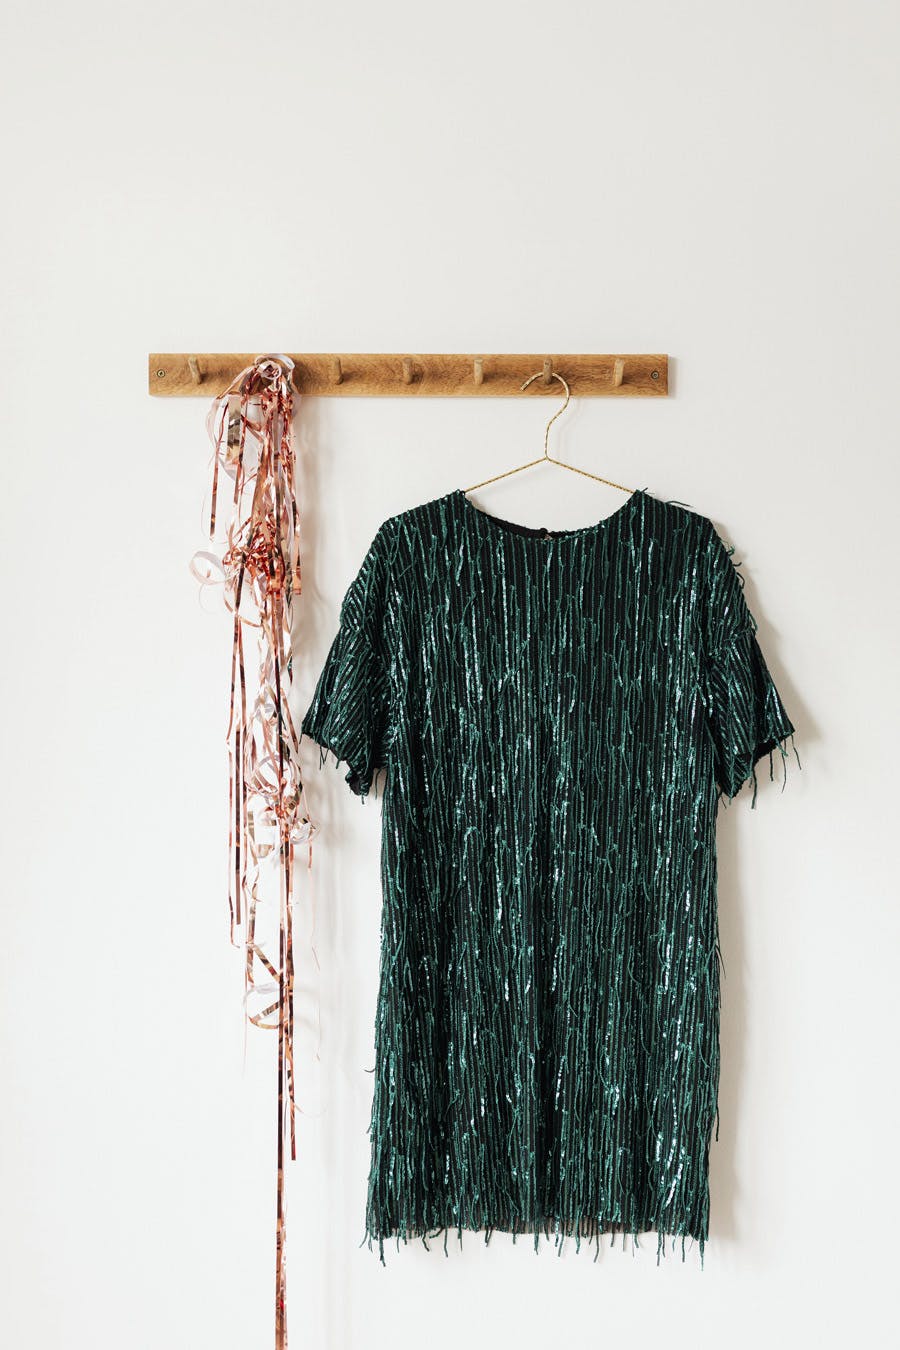  photo of dark green sequin dress hanging on a wall